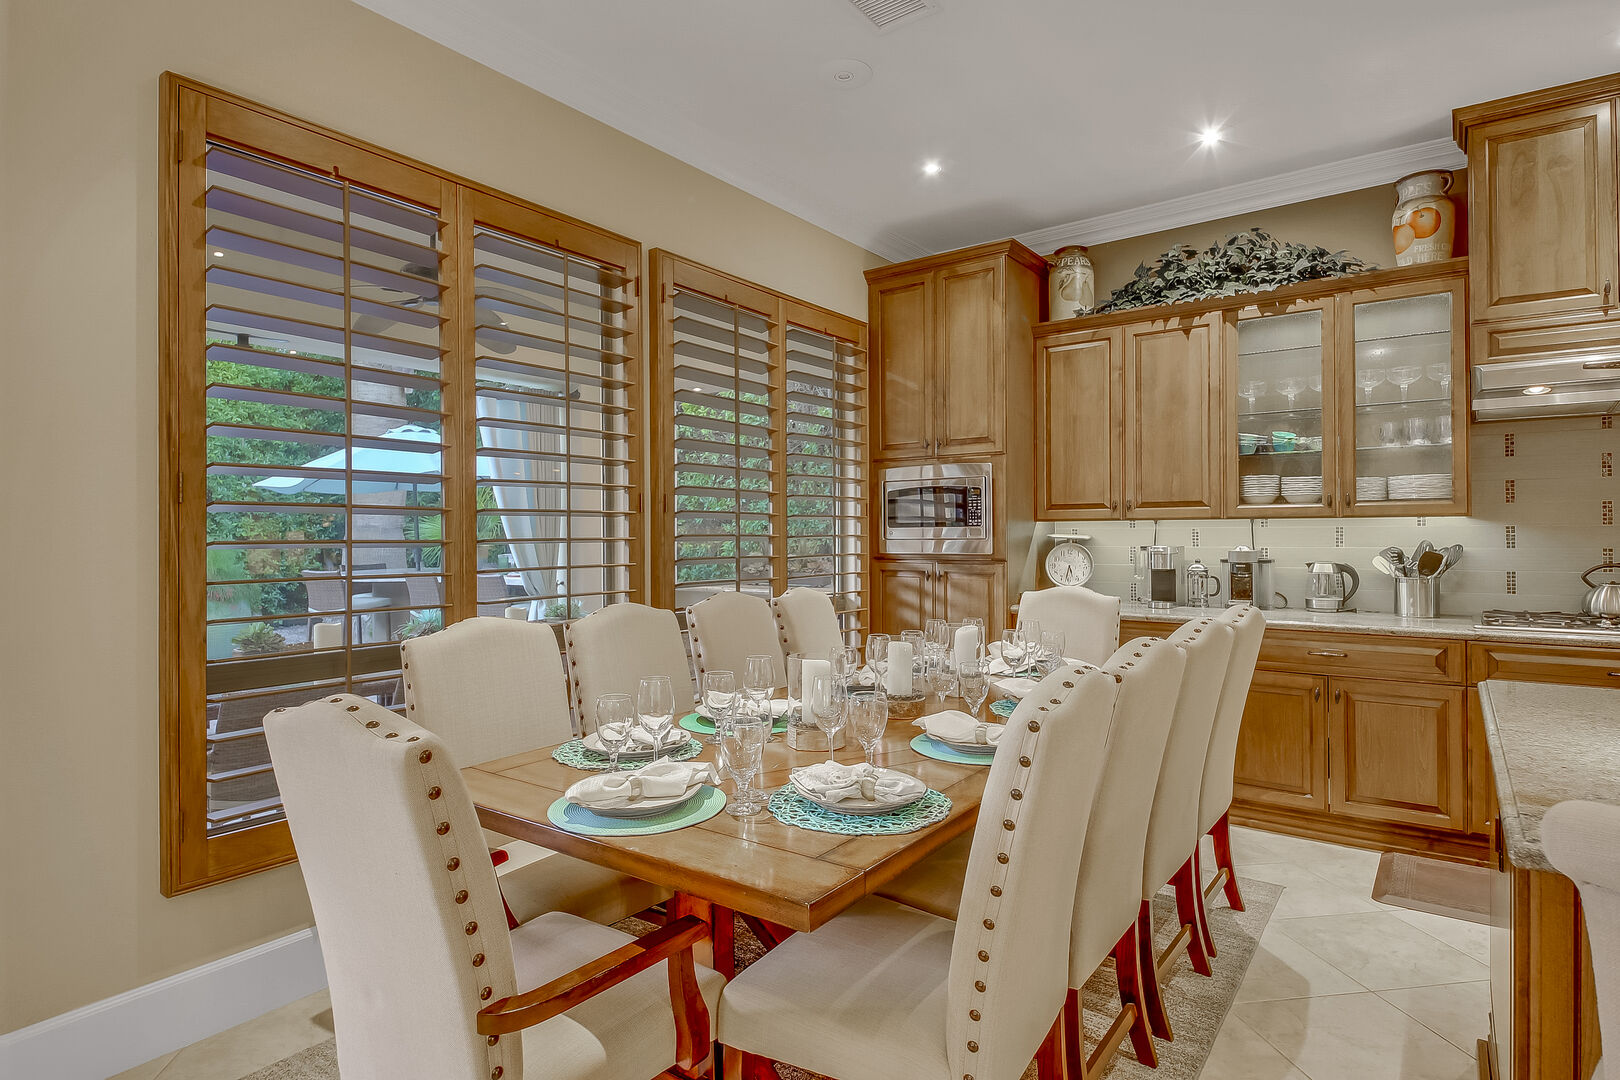 The casual dining room features a dining table with seating for 8.